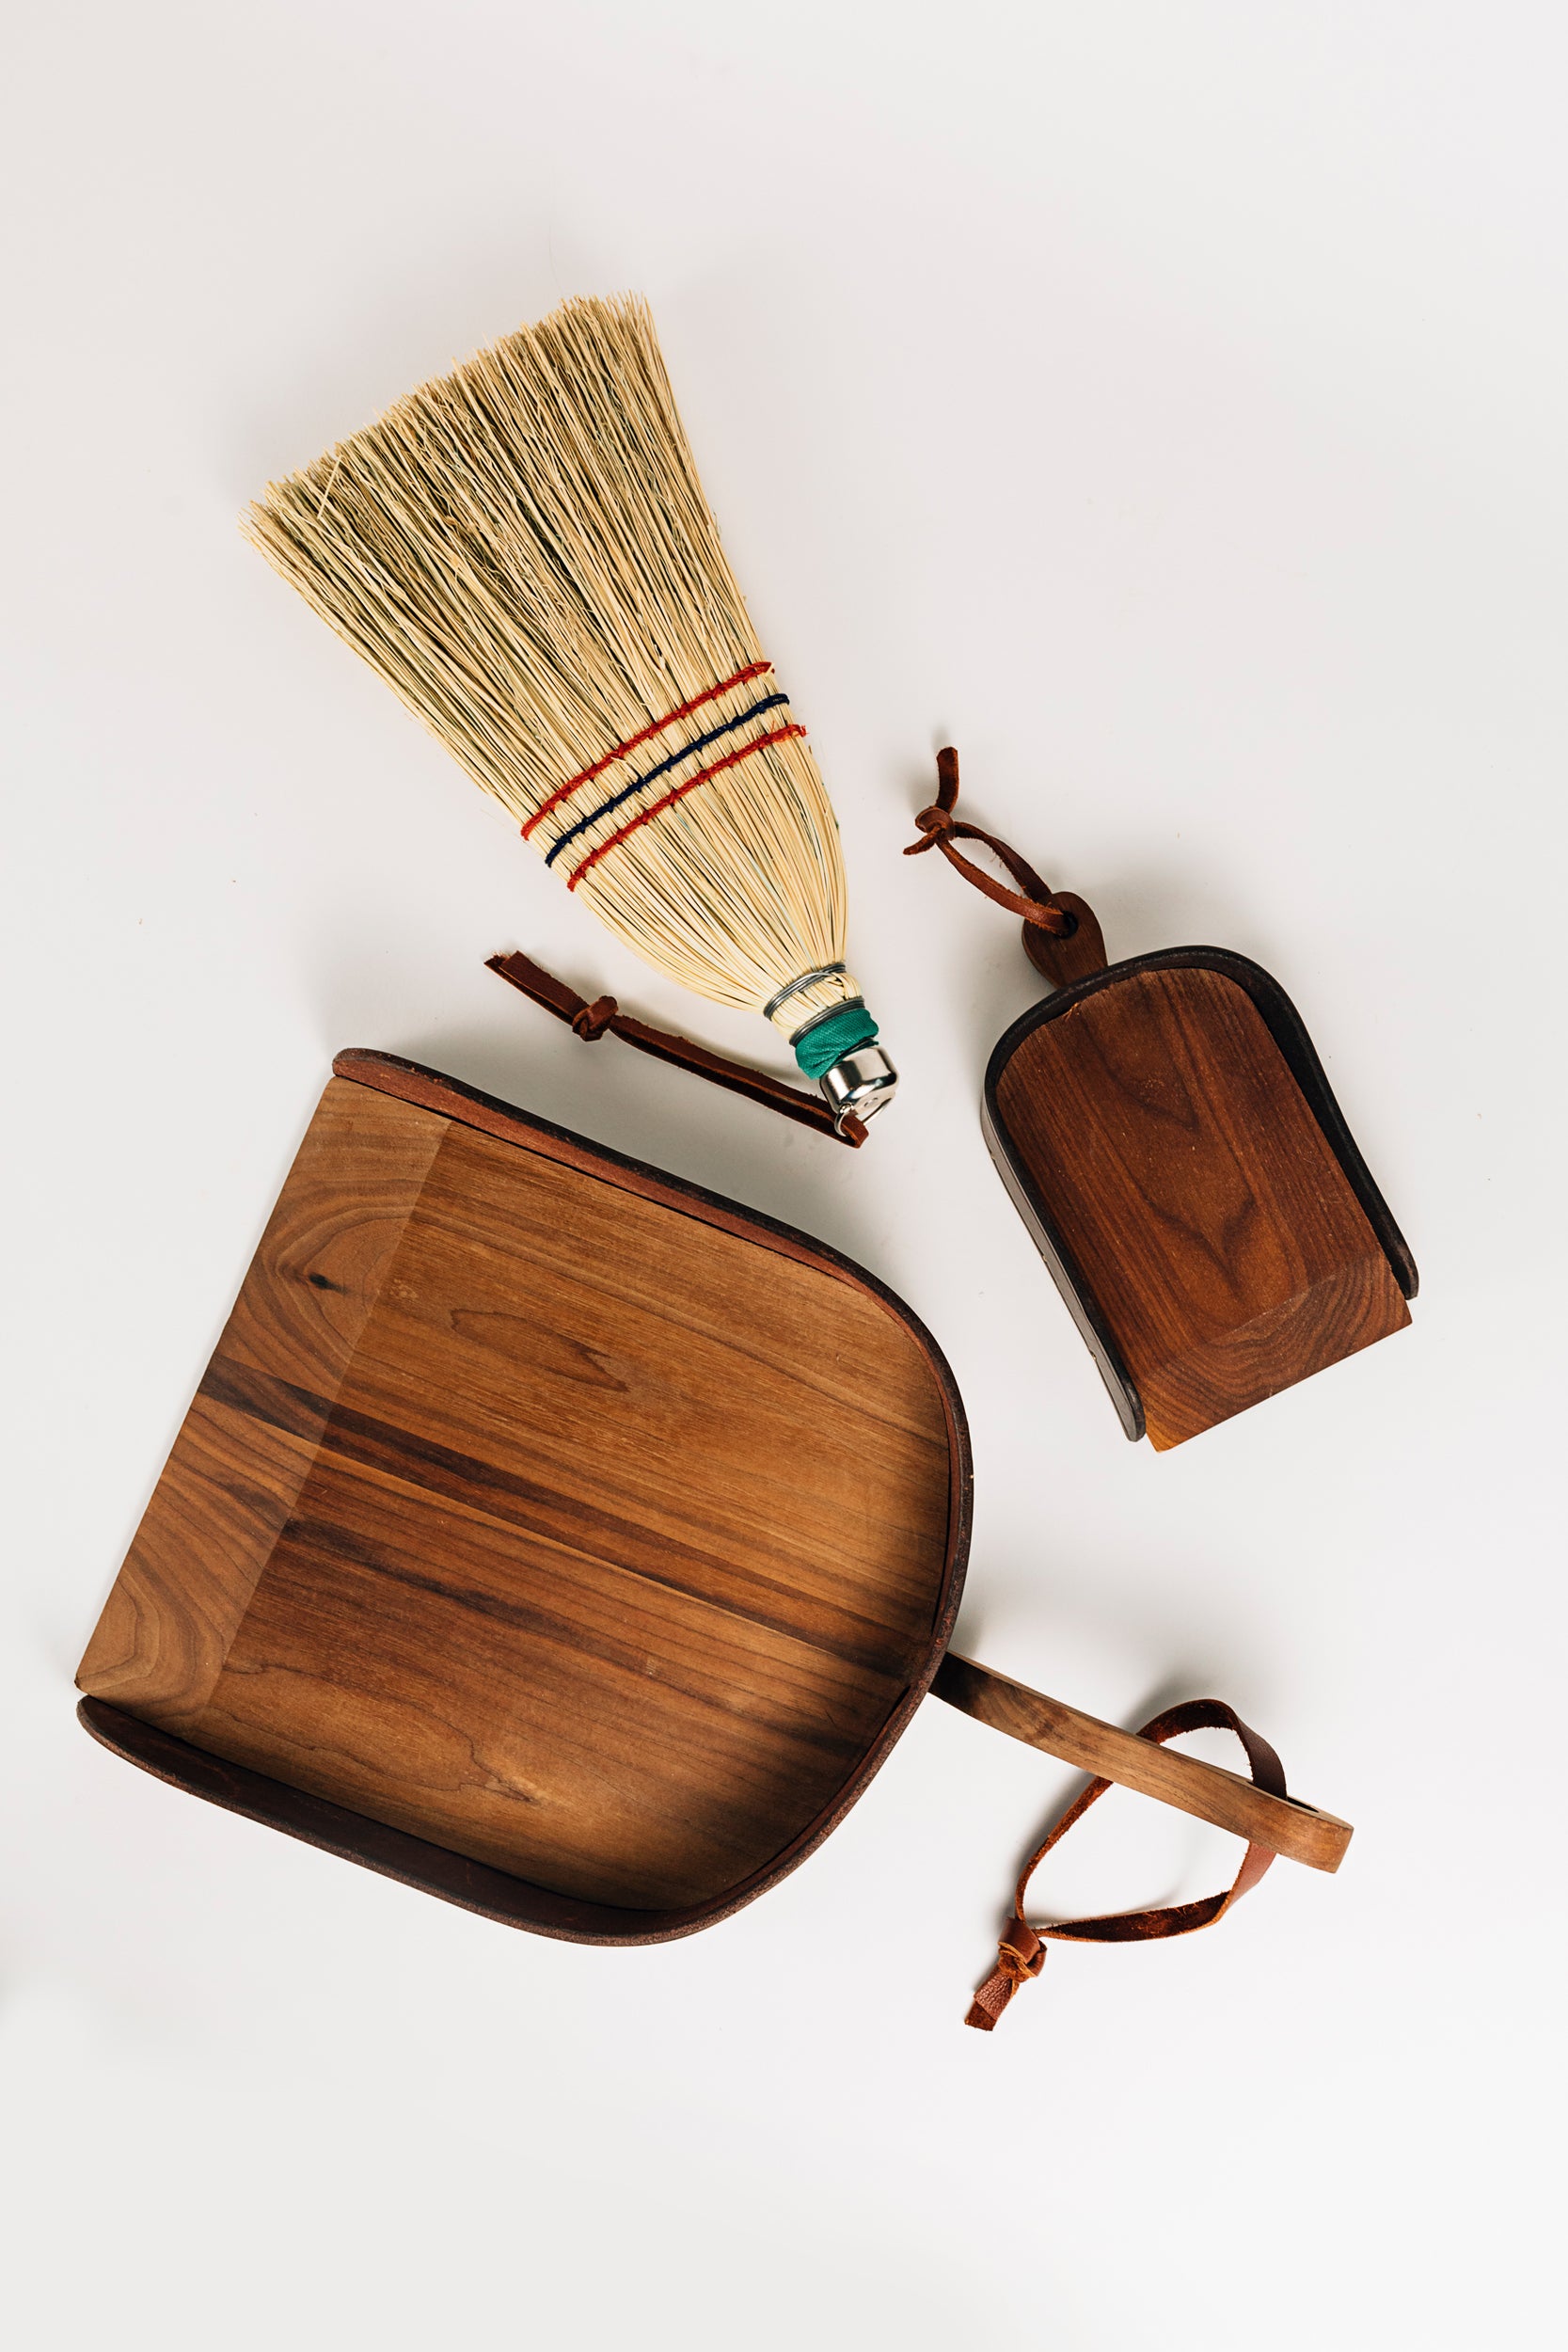 The Child's Leather and Wood Dustpan Next to a Hand Broom and Dustpan